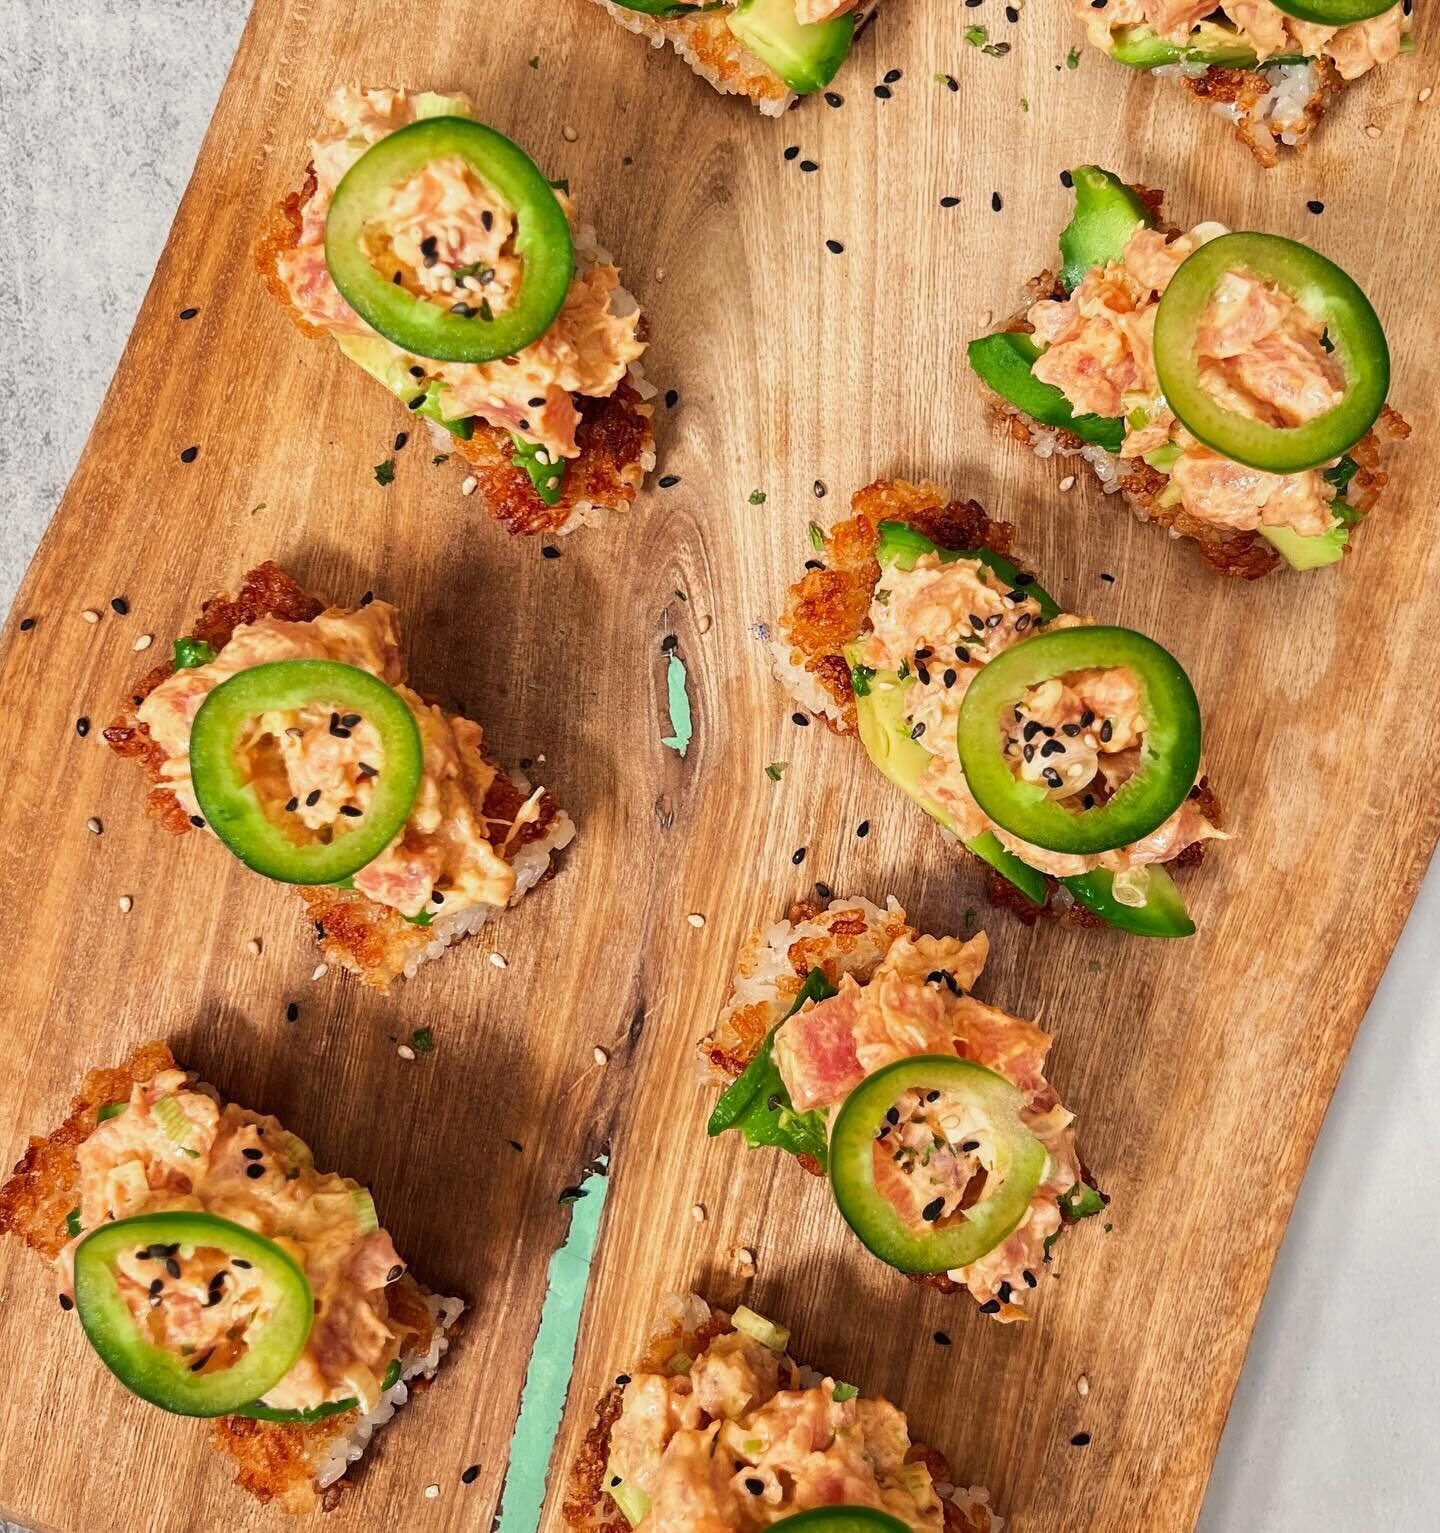 Spicy Tuna Crispy Rice 

Holiday season is full effect &amp; if you are hosting or attending a soir&eacute;e, spicy tuna crispy rice is an easy &amp; impressive appetizer to serve or bring, also it&rsquo;s super delish-a-roo!!!

Spicy tuna crispy ric